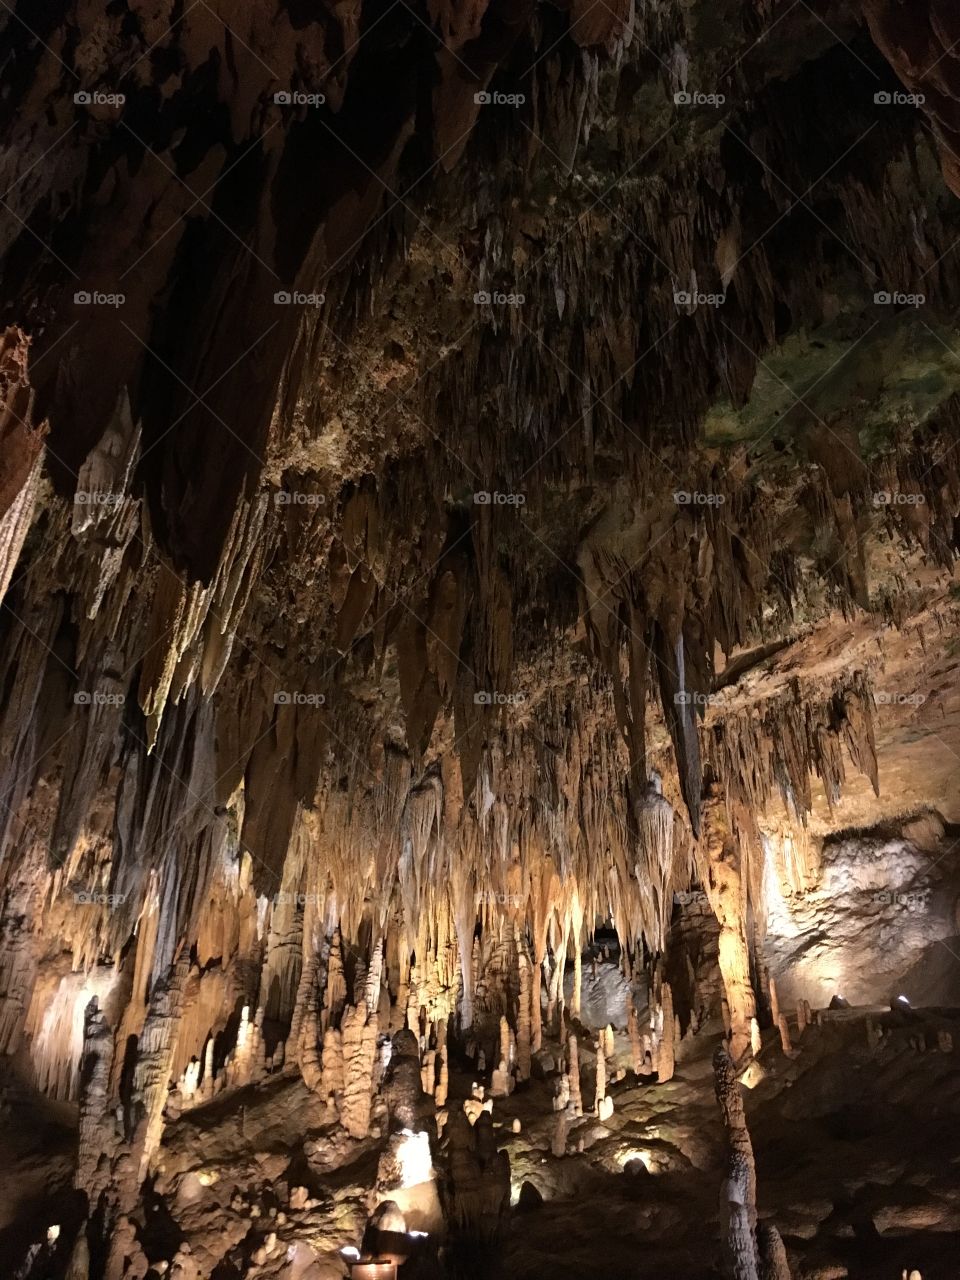 Huge stalactites from a cavern ceiling in Virginia.